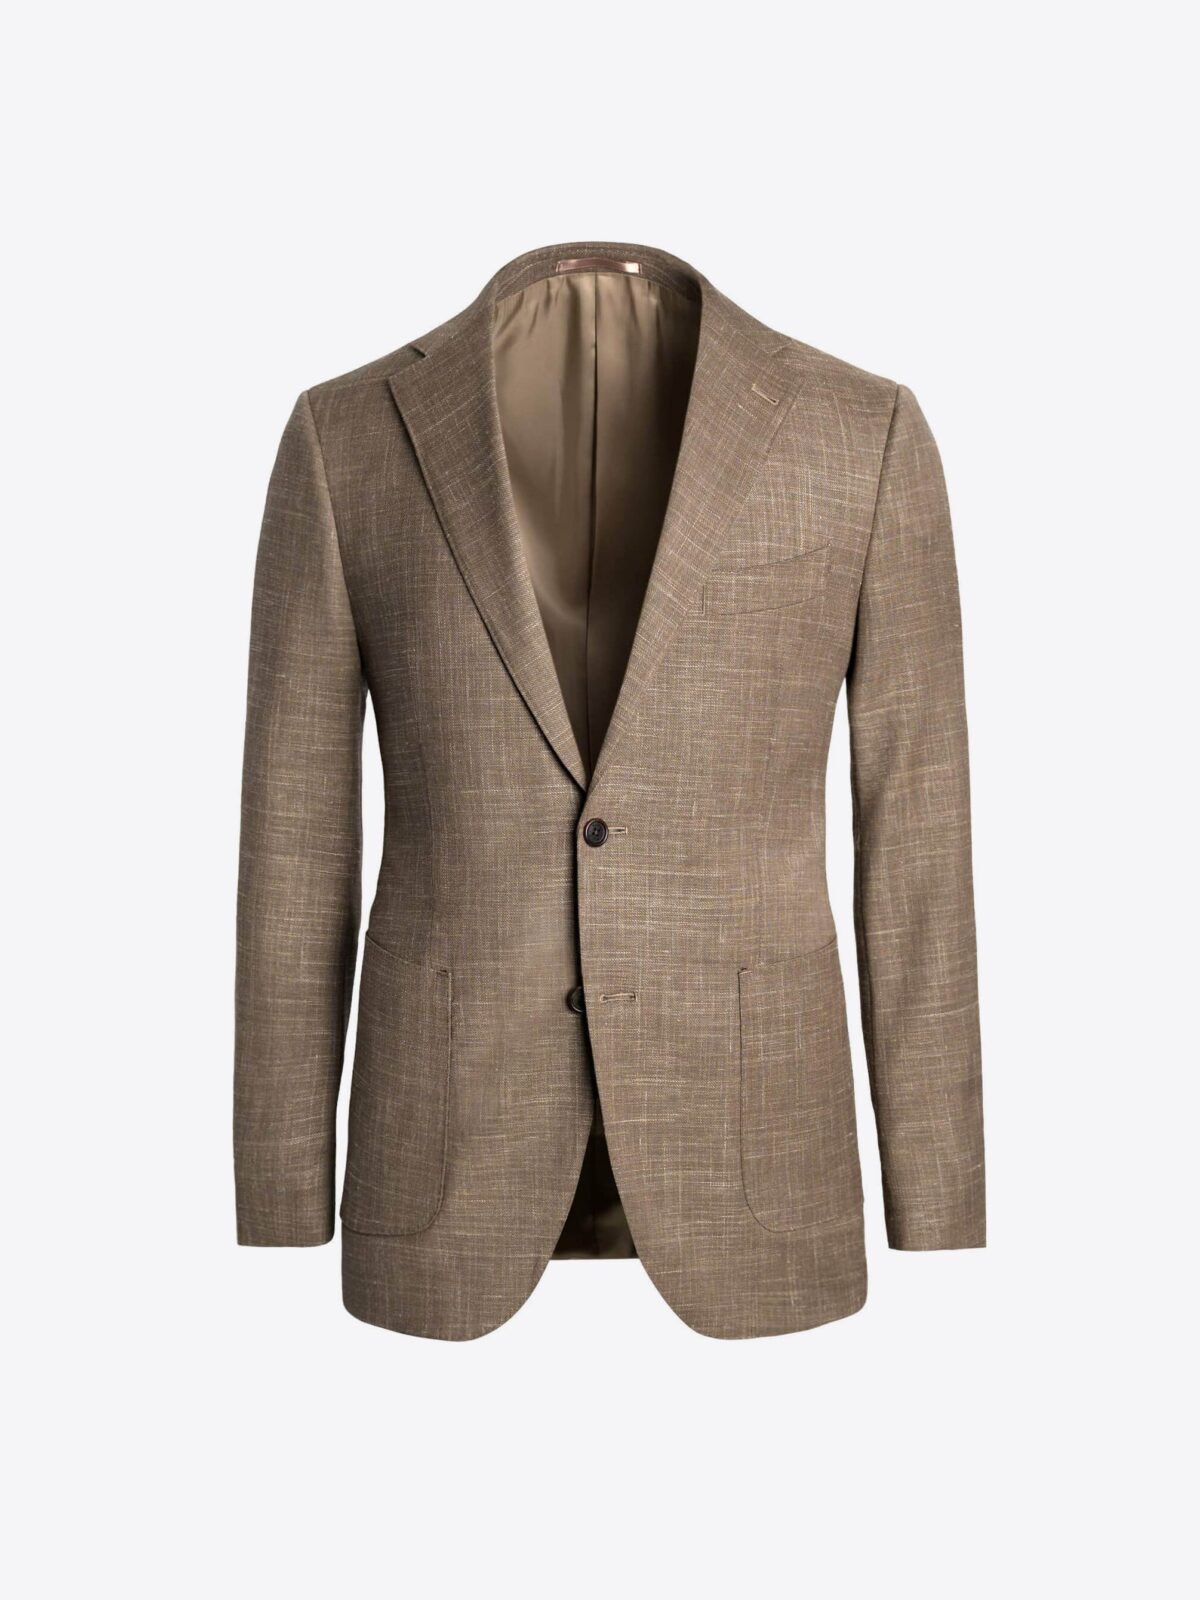 Mocha Wool and Linen Stretch Bedford Clothing Custom Tailored - Fit Jacket